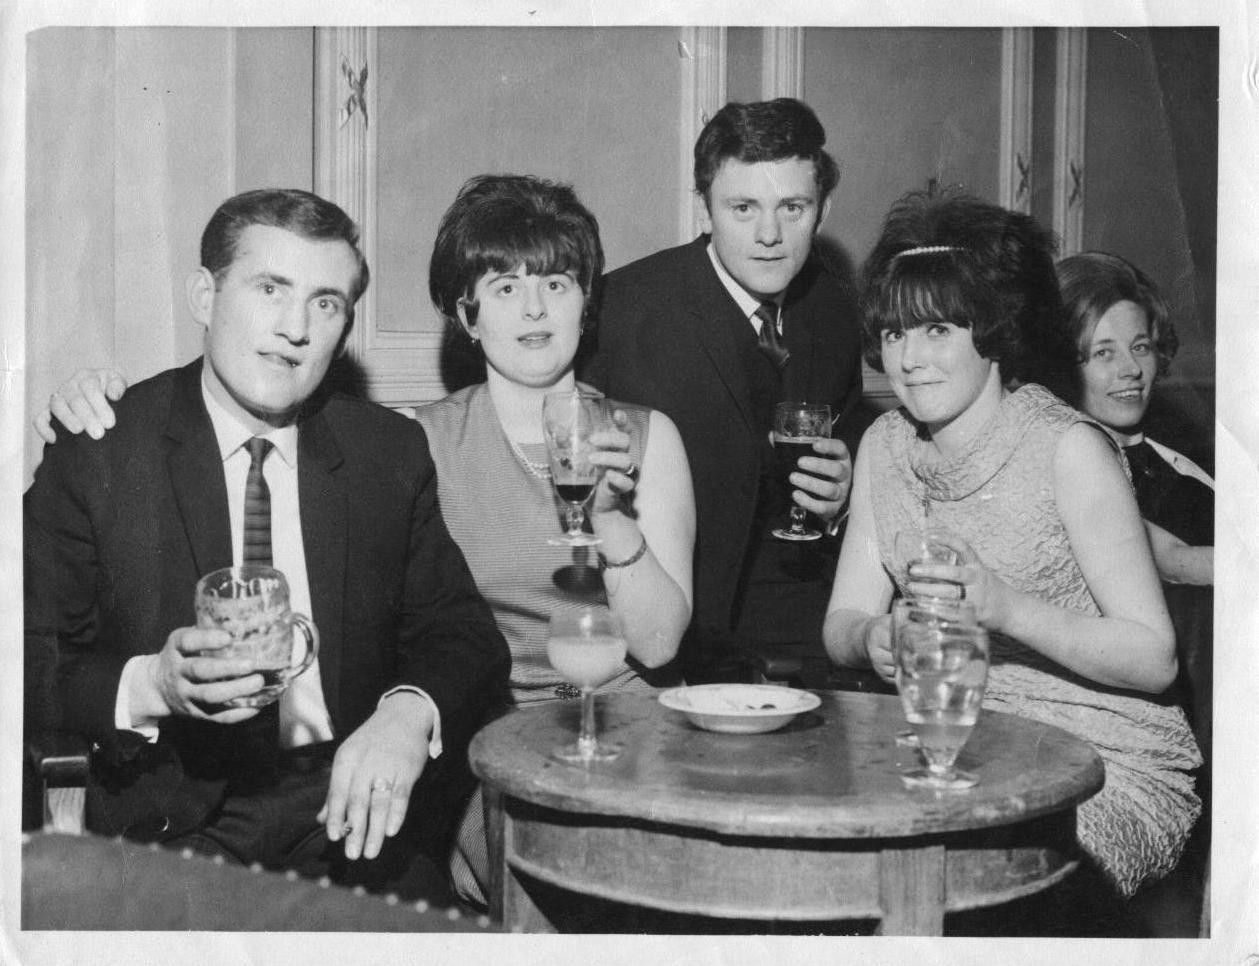 A family enjoys a dinner dance held by Brian Borus GAA Club in London in the mid-1960s. Pictured from left to right are Johnny Barrett, Joan Barrett, PJ Barrett, and Anna Barrett.